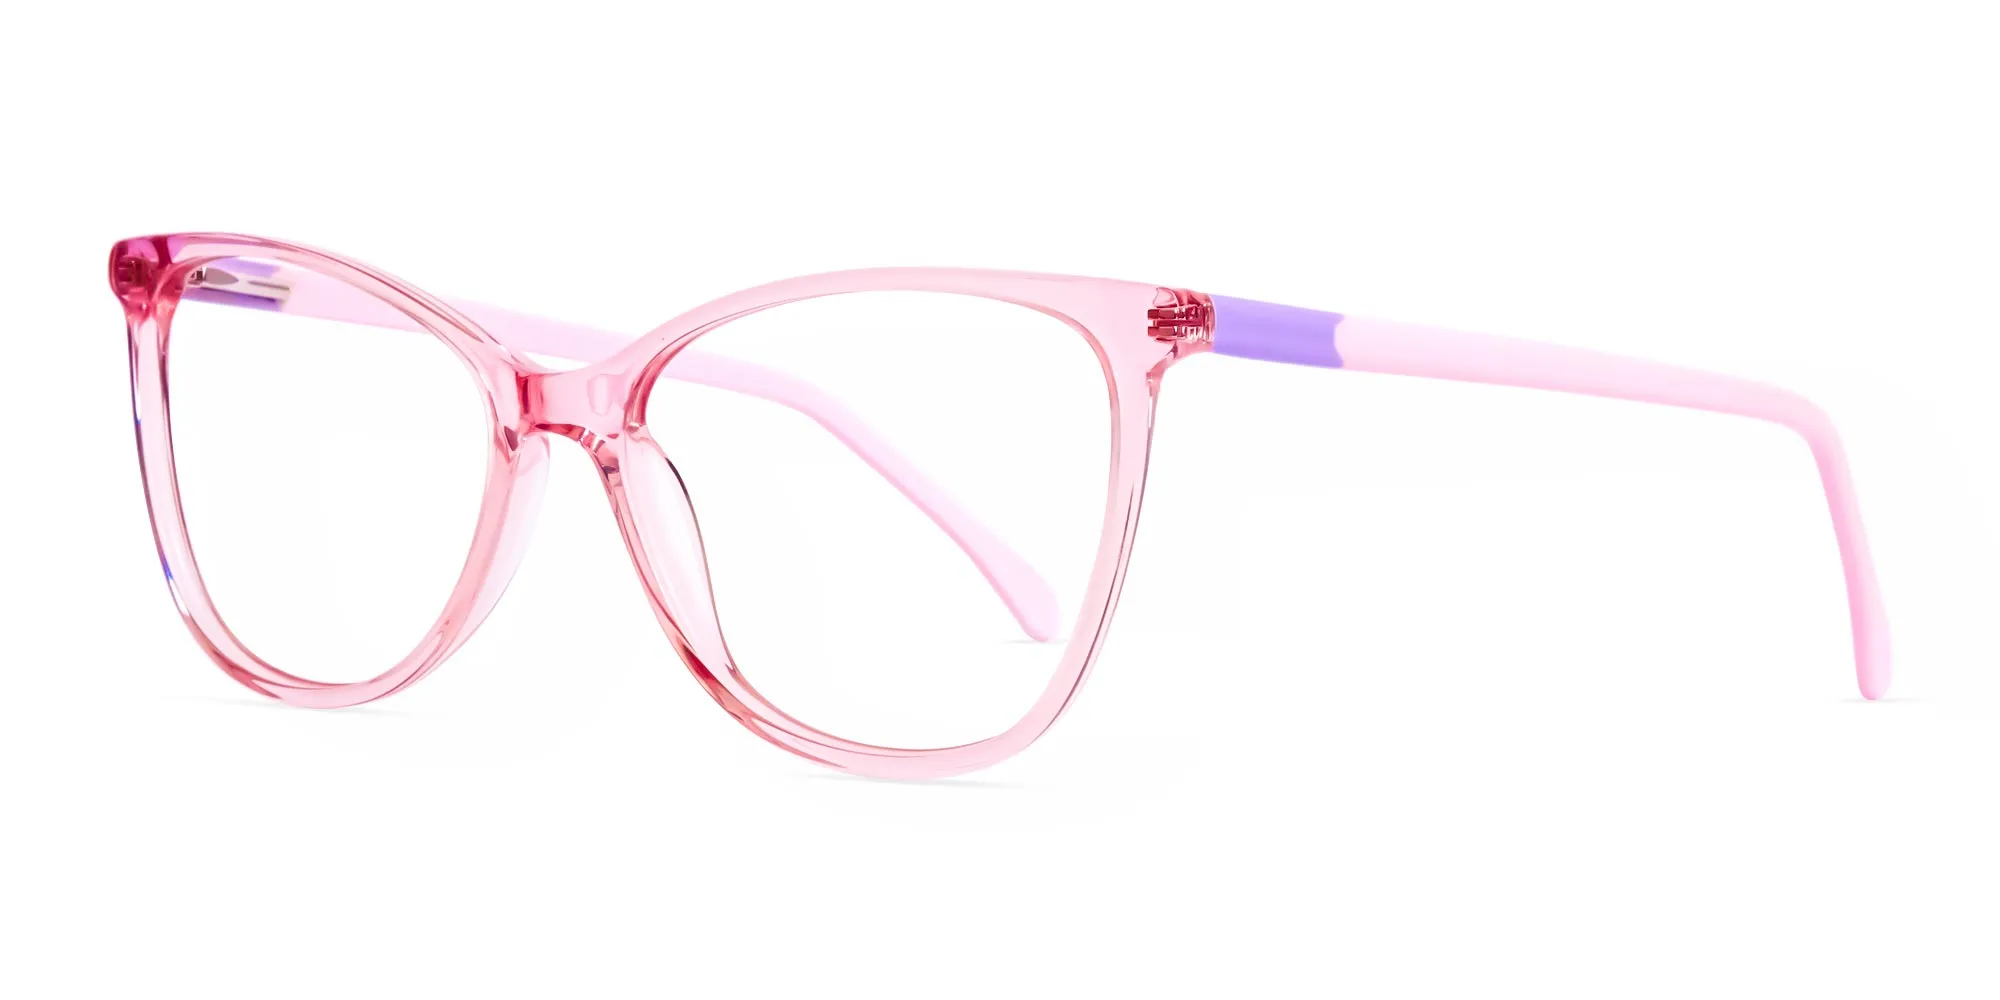 Crystal Clear or Transparent blossom and hot Pink Round Glasses Frames-2